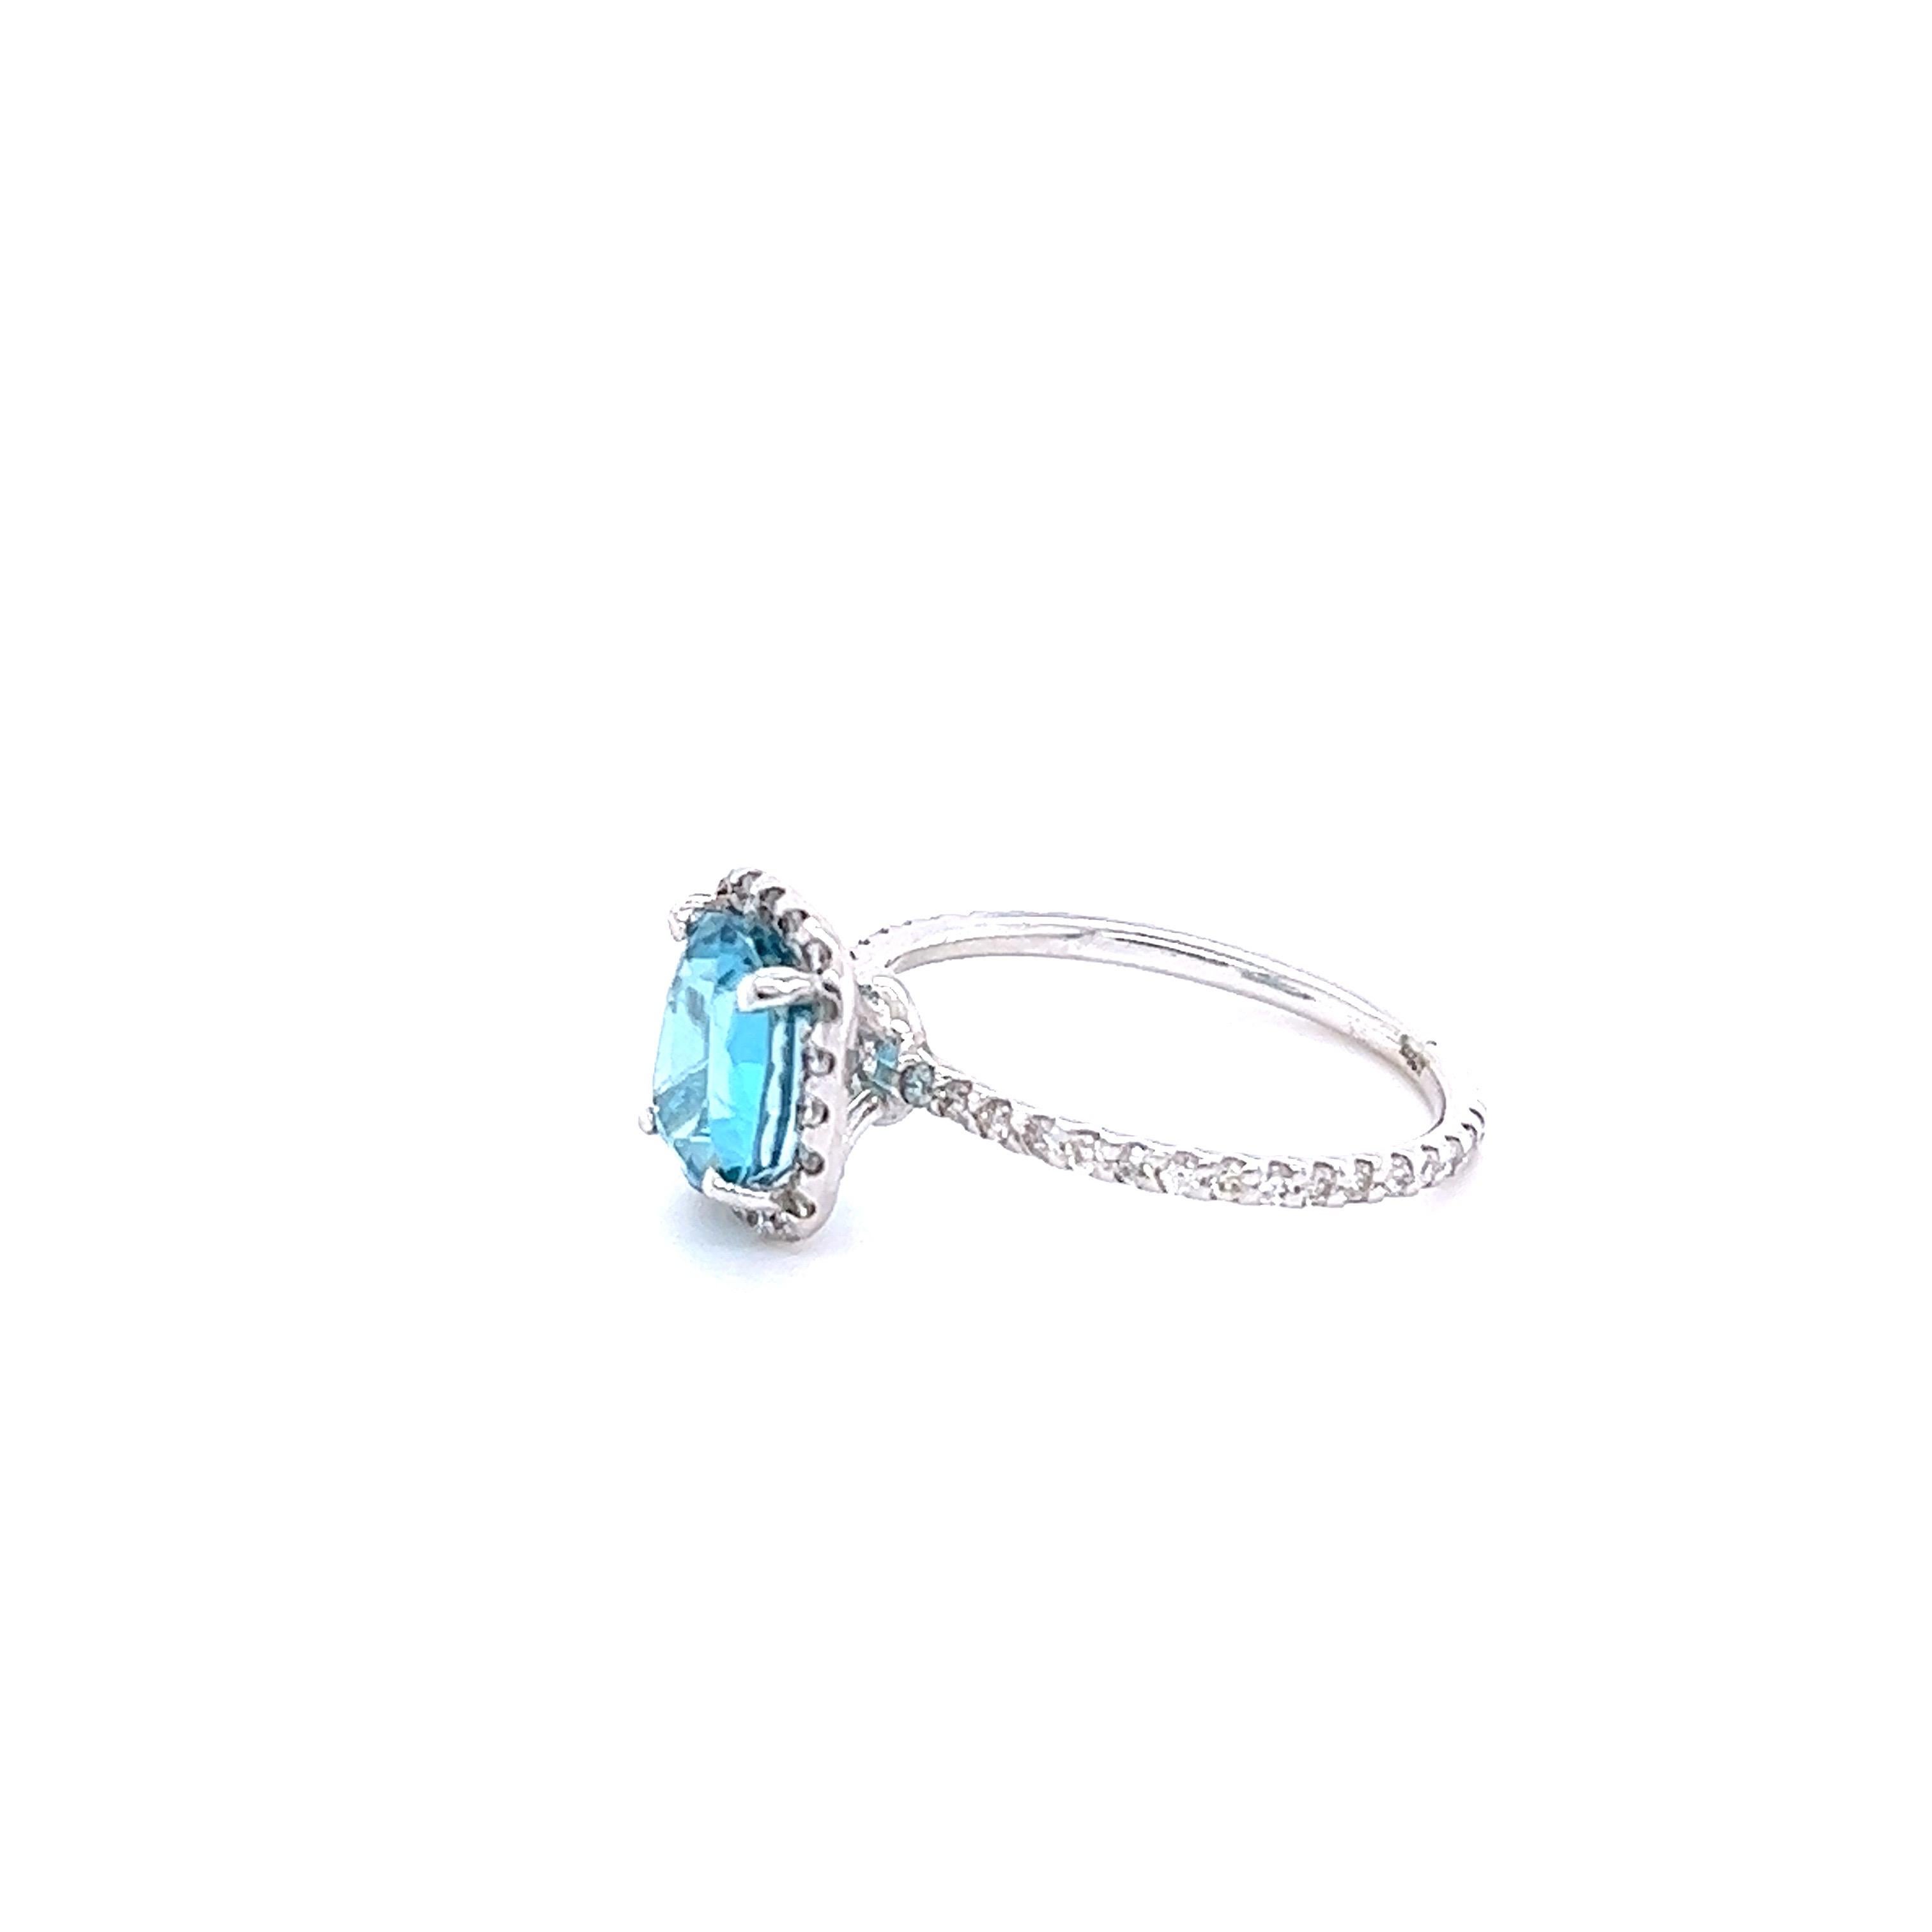 Blue Zircon is a natural stone mined mainly in Sri Lanka, Myanmar, and Australia.  
This ring has a Oval Cut Blue Zircon that weighs 3.40 carats measures at 8 mm x 7 mm. It is surrounded by Natural Round Cut Diamonds that weigh 0.46 Carats. Clarity: